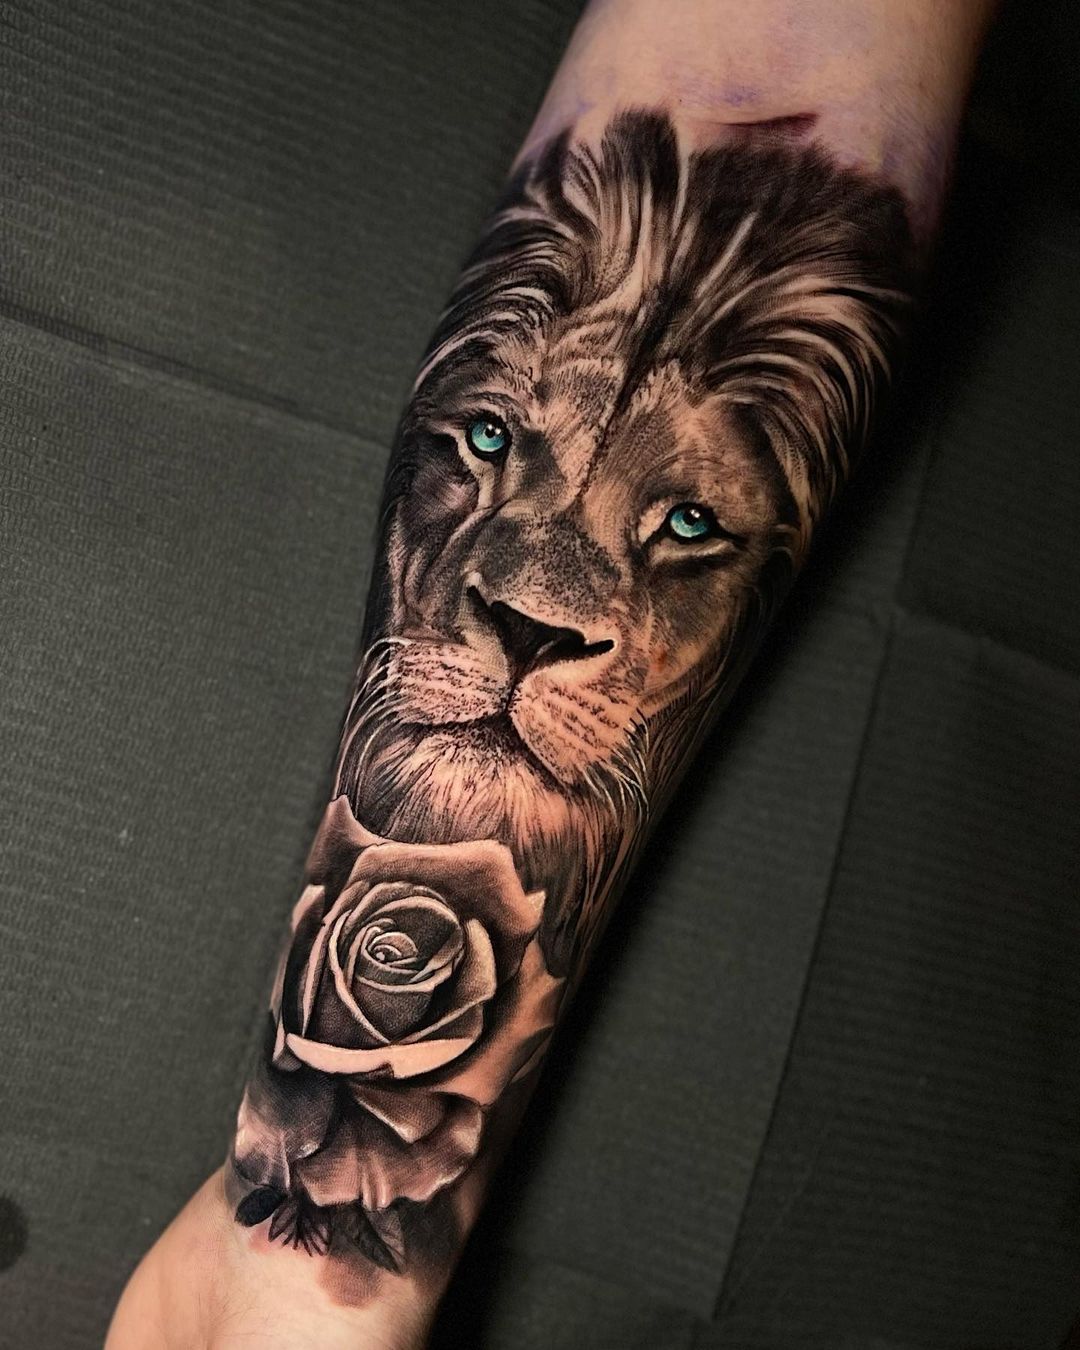 ISO Hyper Realism Tattoo Artist!! I'm looking for the best of the best!  Examples of what I consider the “best” are pictures posted. If they aren't  at this level or better I'm